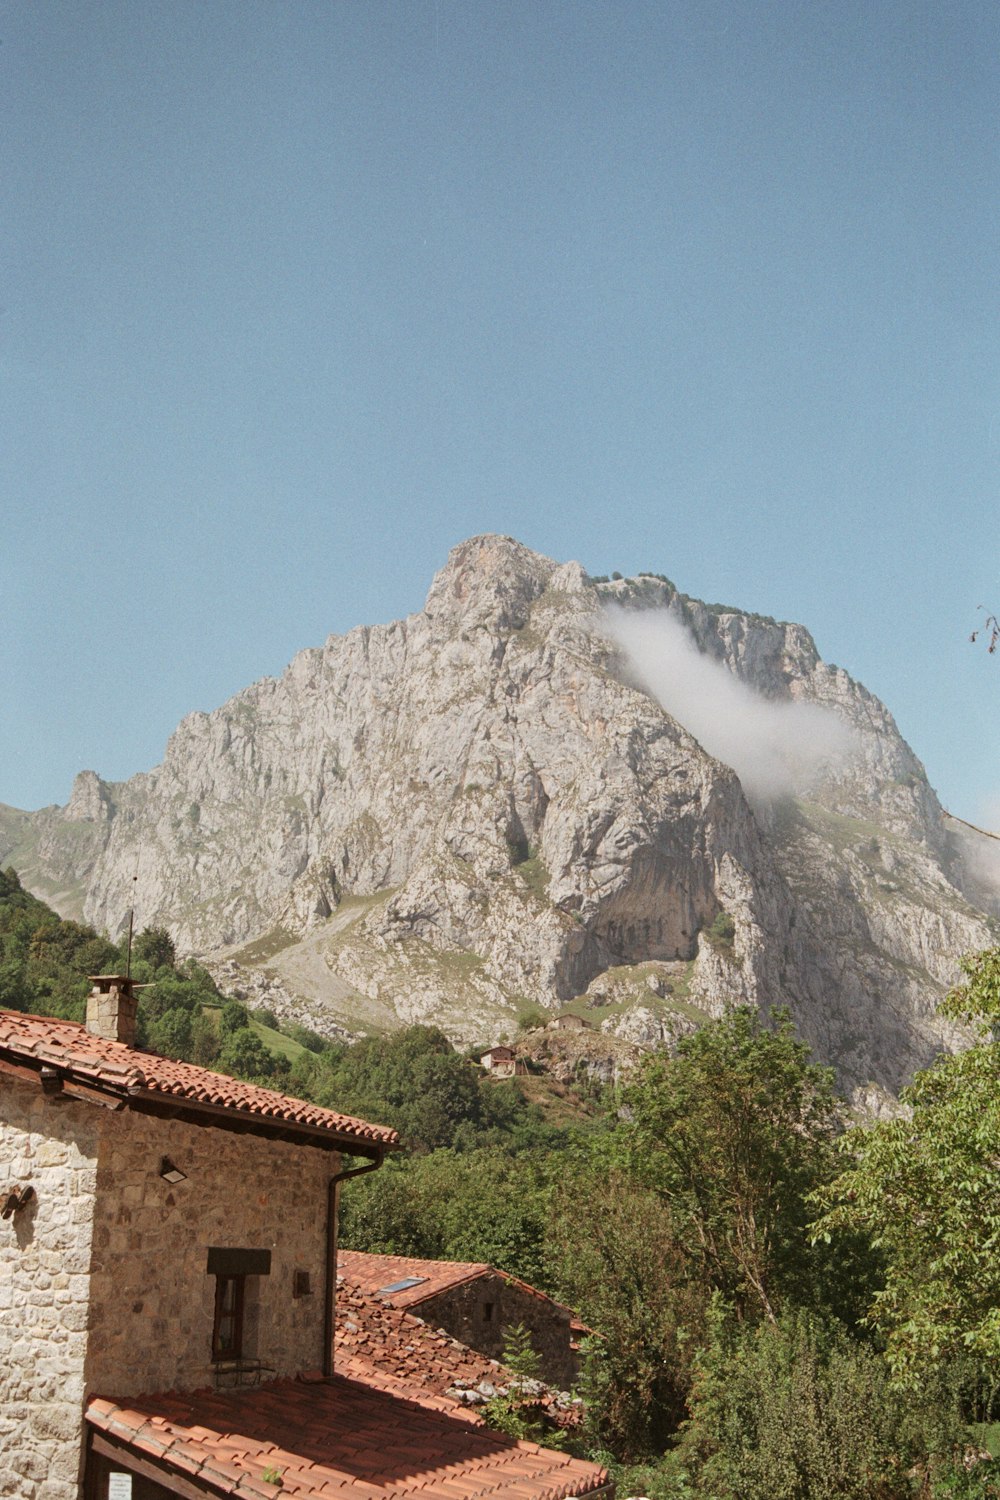 a view of a mountain with a house in the foreground